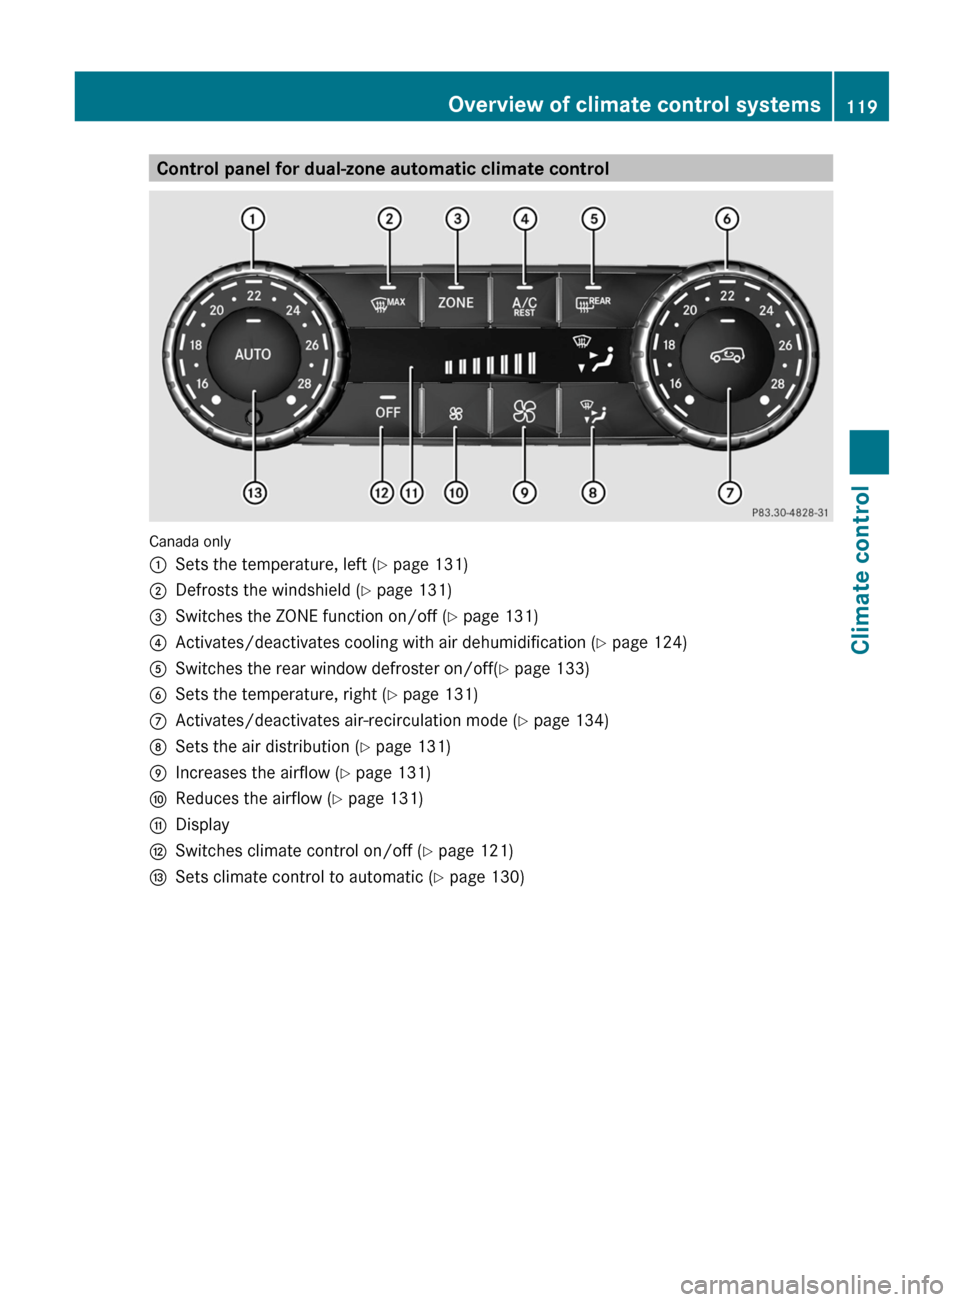 MERCEDES-BENZ G-Class 2013 W463 Owners Manual Control panel for dual-zone automatic climate control
Canada only
:
Sets the temperature, left ( Y page 131)
; Defrosts the windshield ( Y page 131)
= Switches the ZONE function on/off ( Y page 131)
?